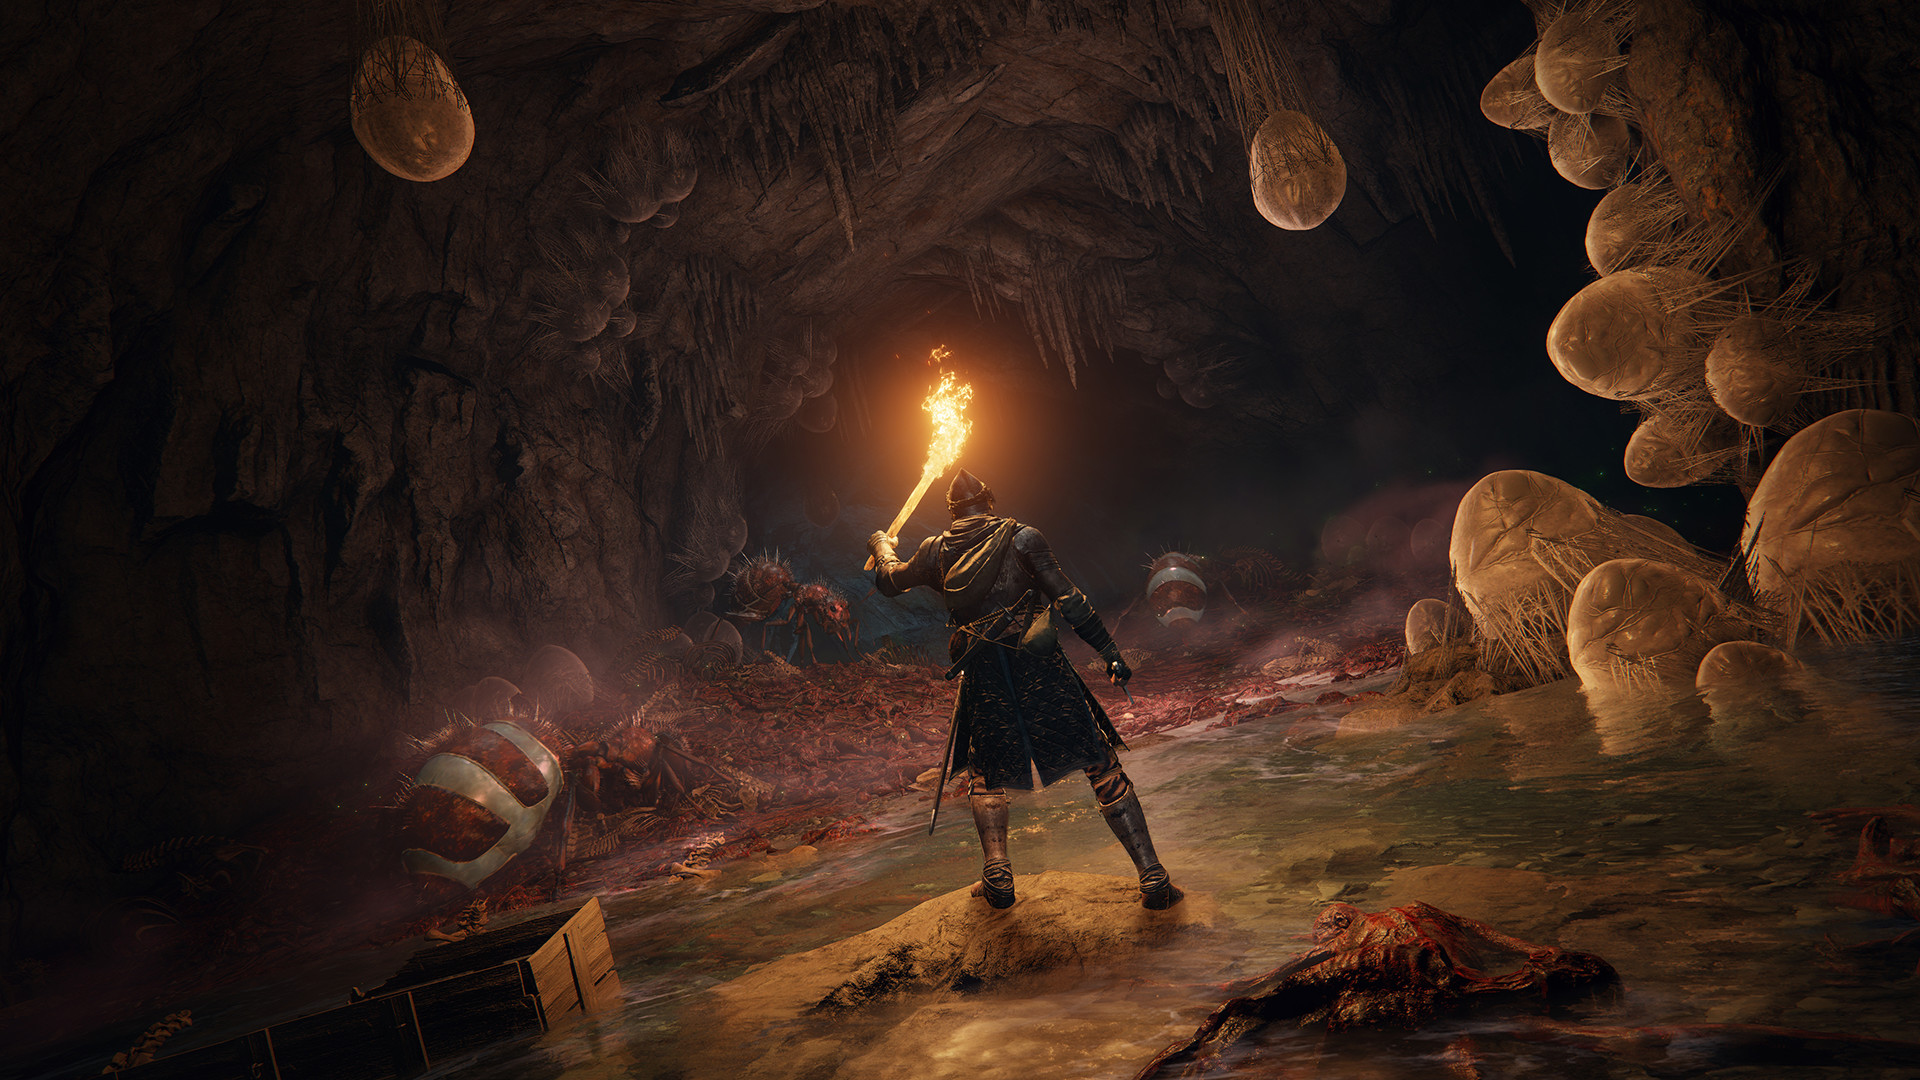 An Elden Ring character holding a torch in a dark tunnel